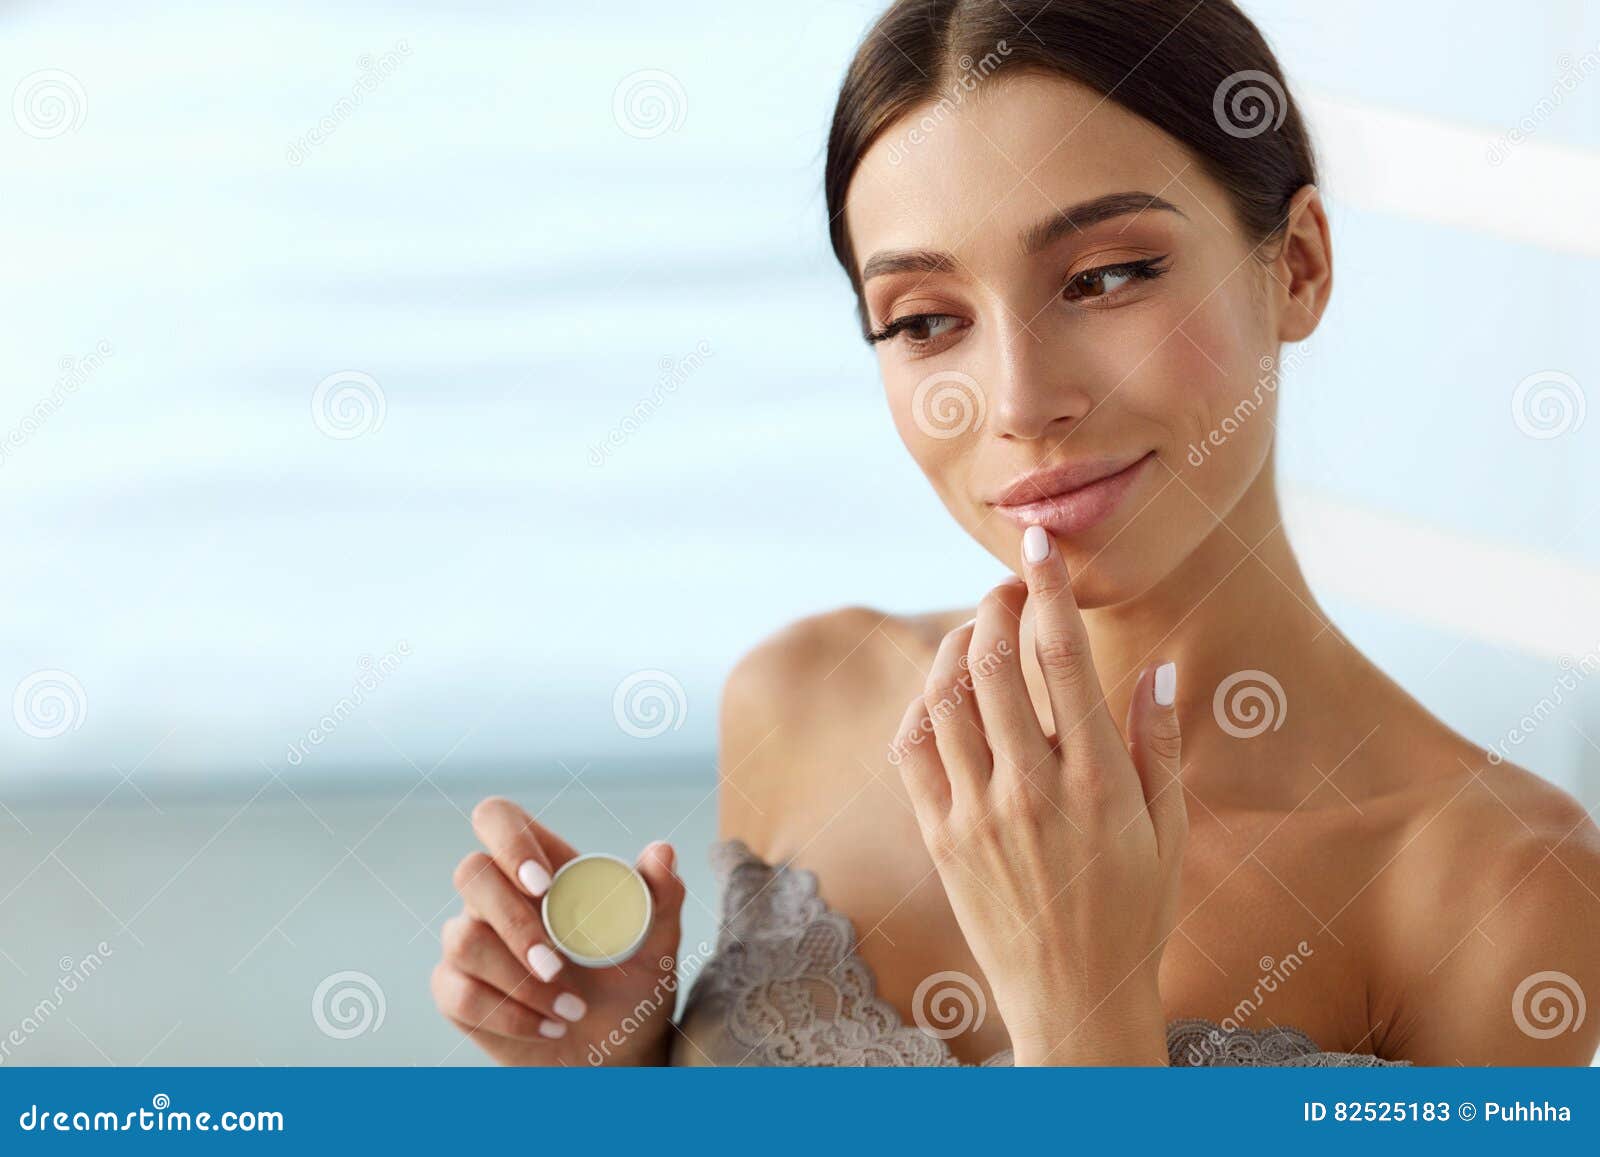 lips skin care. woman with beauty face applying lip balm on